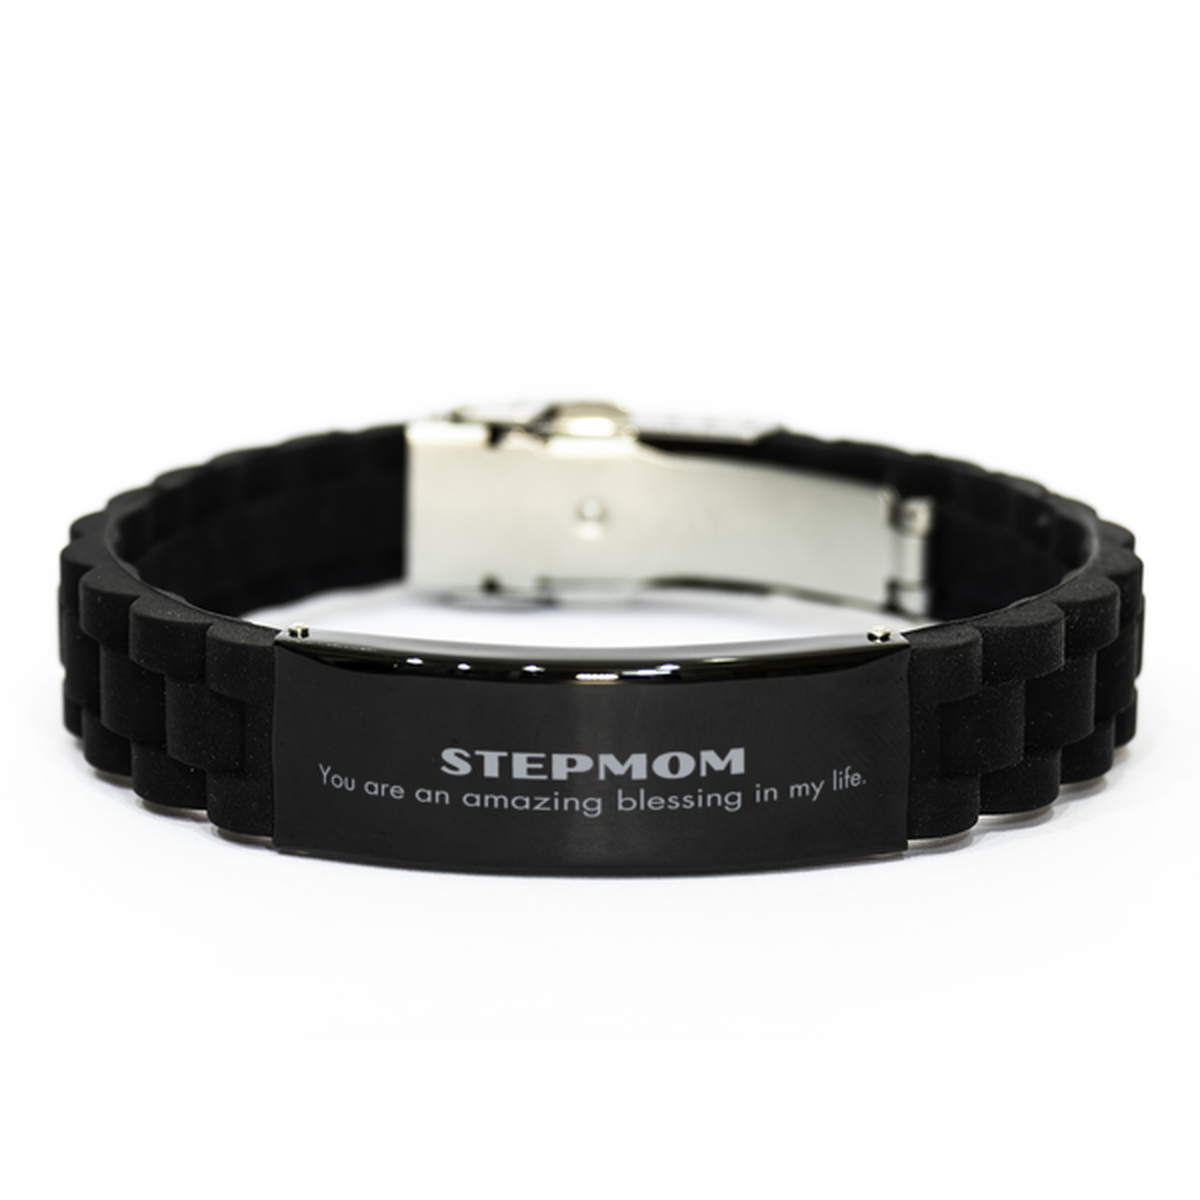 Stepmom Black Glidelock Clasp Bracelet, You are an amazing blessing in my life, Thank You Gifts For Stepmom, Inspirational Birthday Christmas Unique Gifts For Stepmom